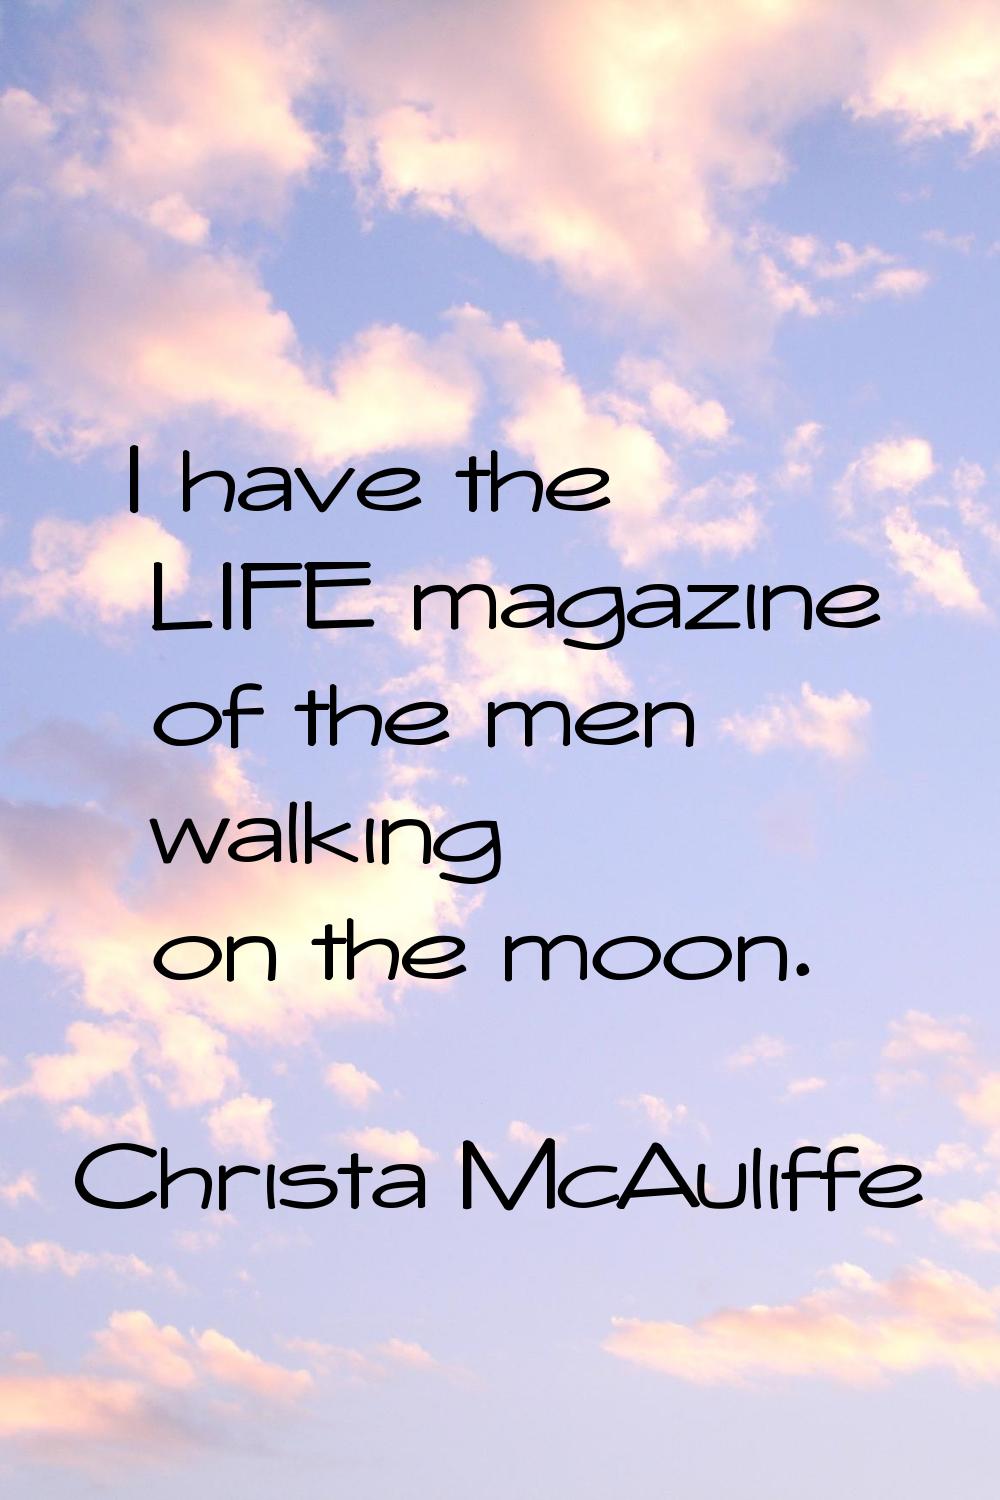 I have the LIFE magazine of the men walking on the moon.